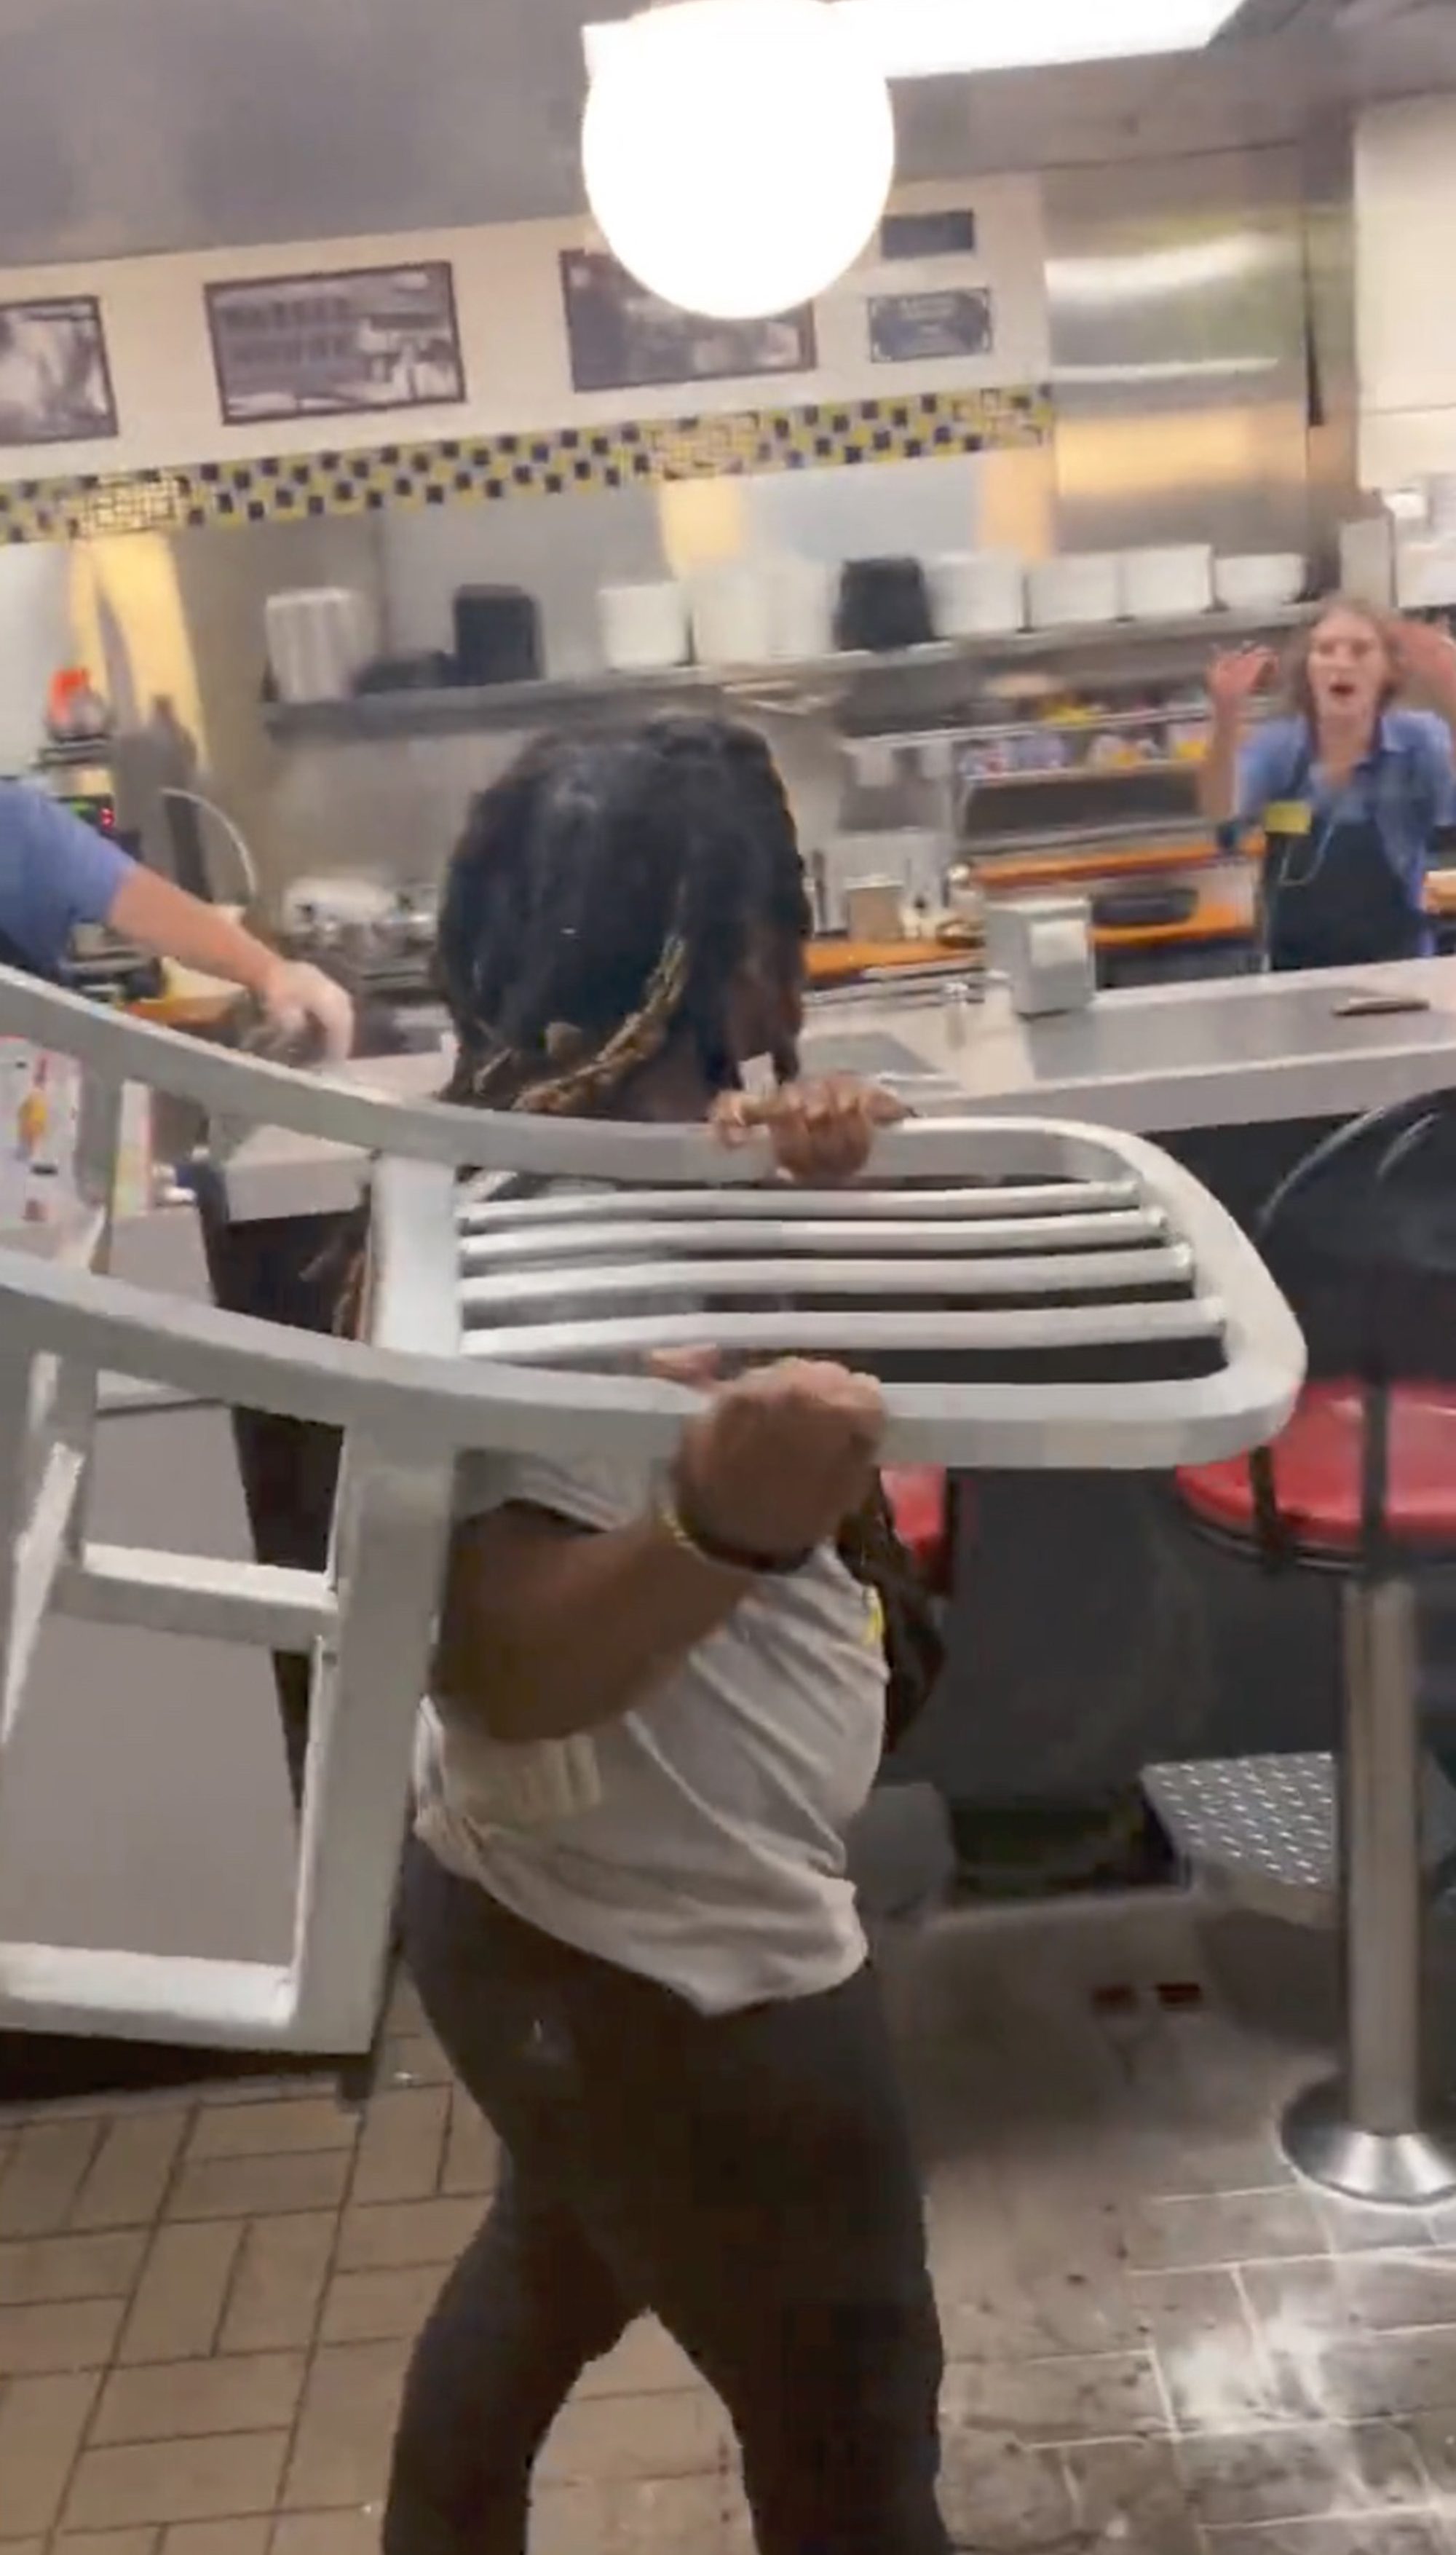 The employee took on the unruly patrons, even fending off a chair that was flung in her direction. 